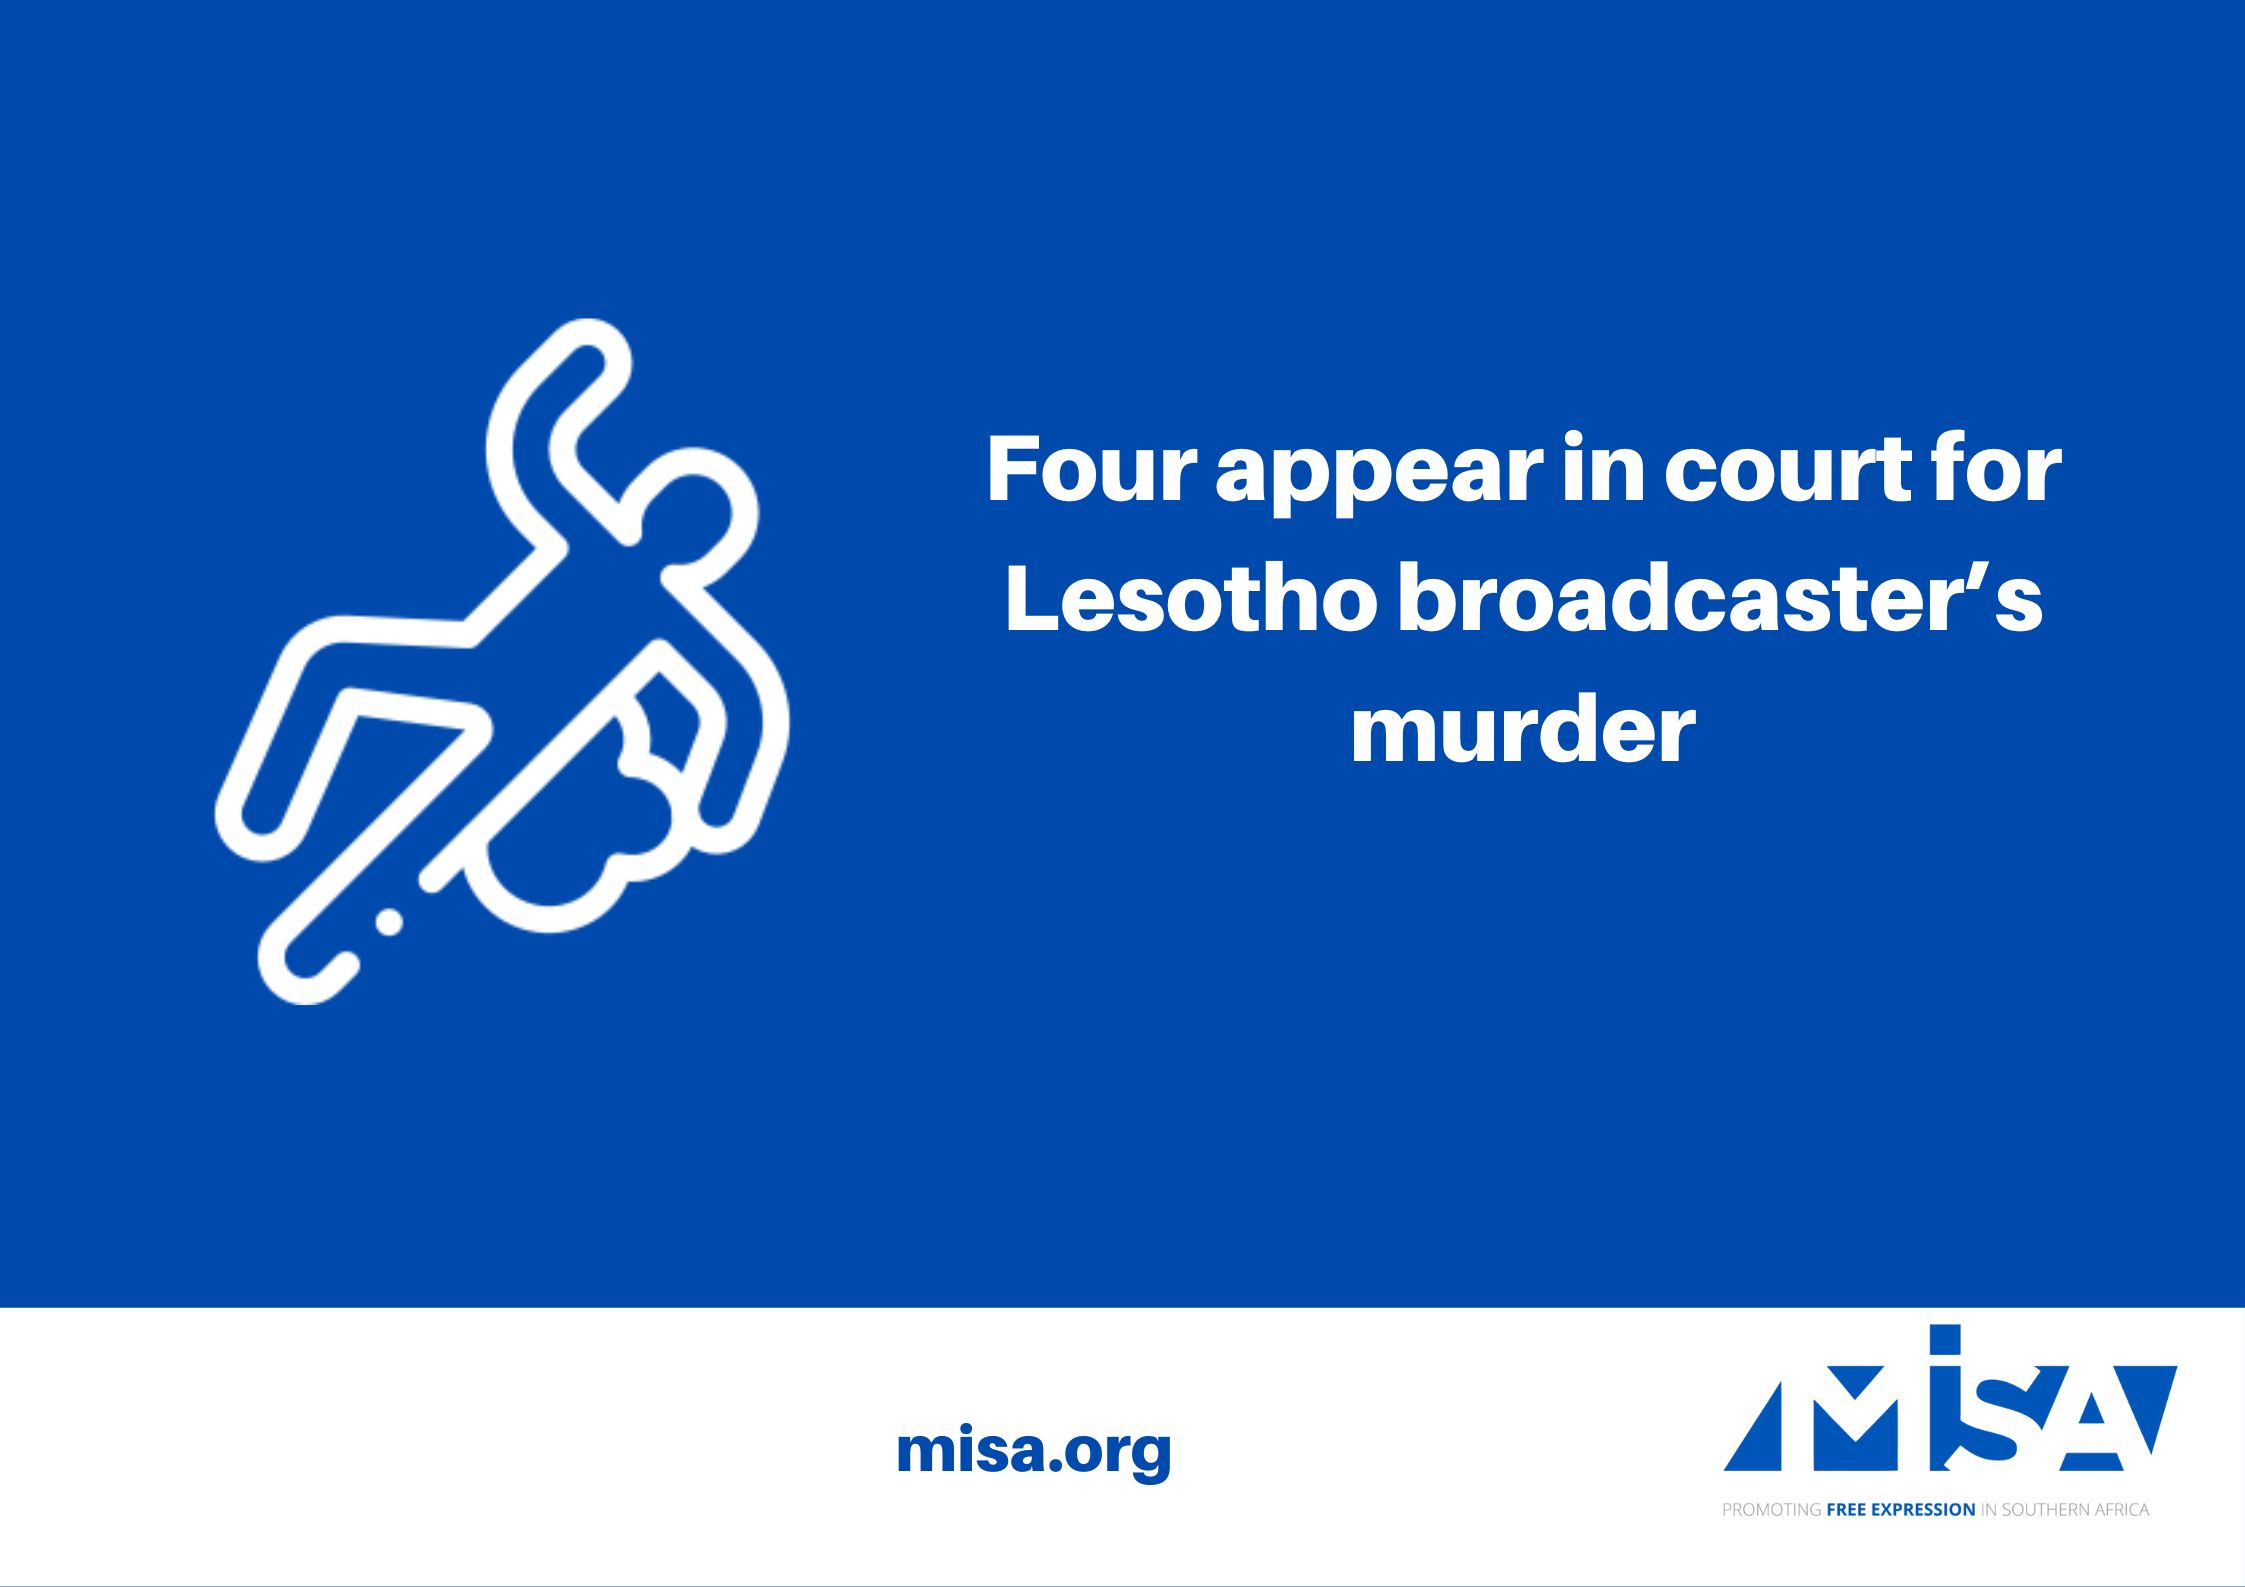 Four appear in court for Lesotho broadcaster’s murder